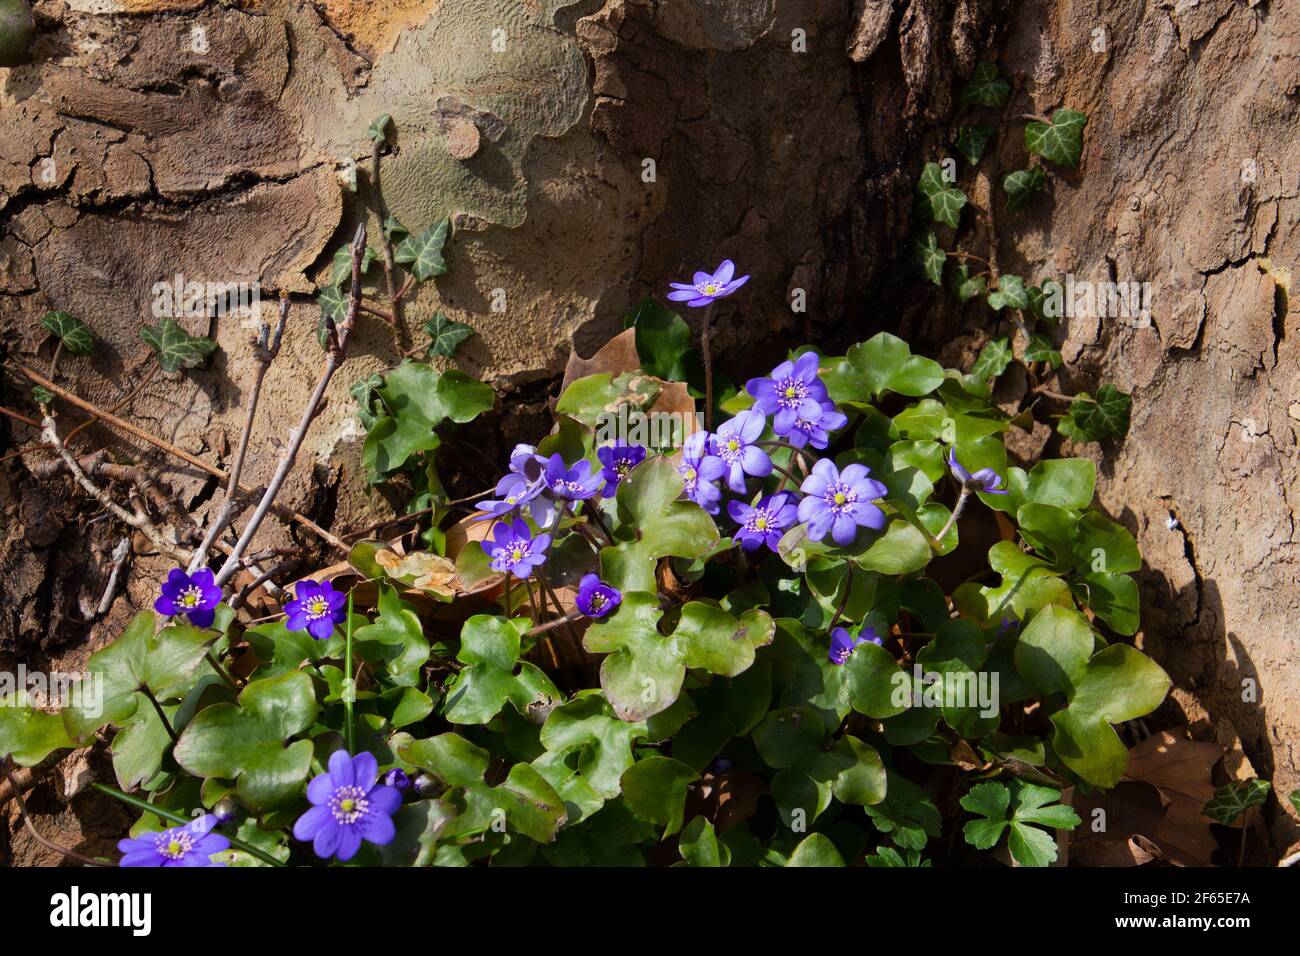 Blue liverwort growing near a tree trunk of a plane tree, also called Anemone hepatica, Platanus acerifolia Stock Photo